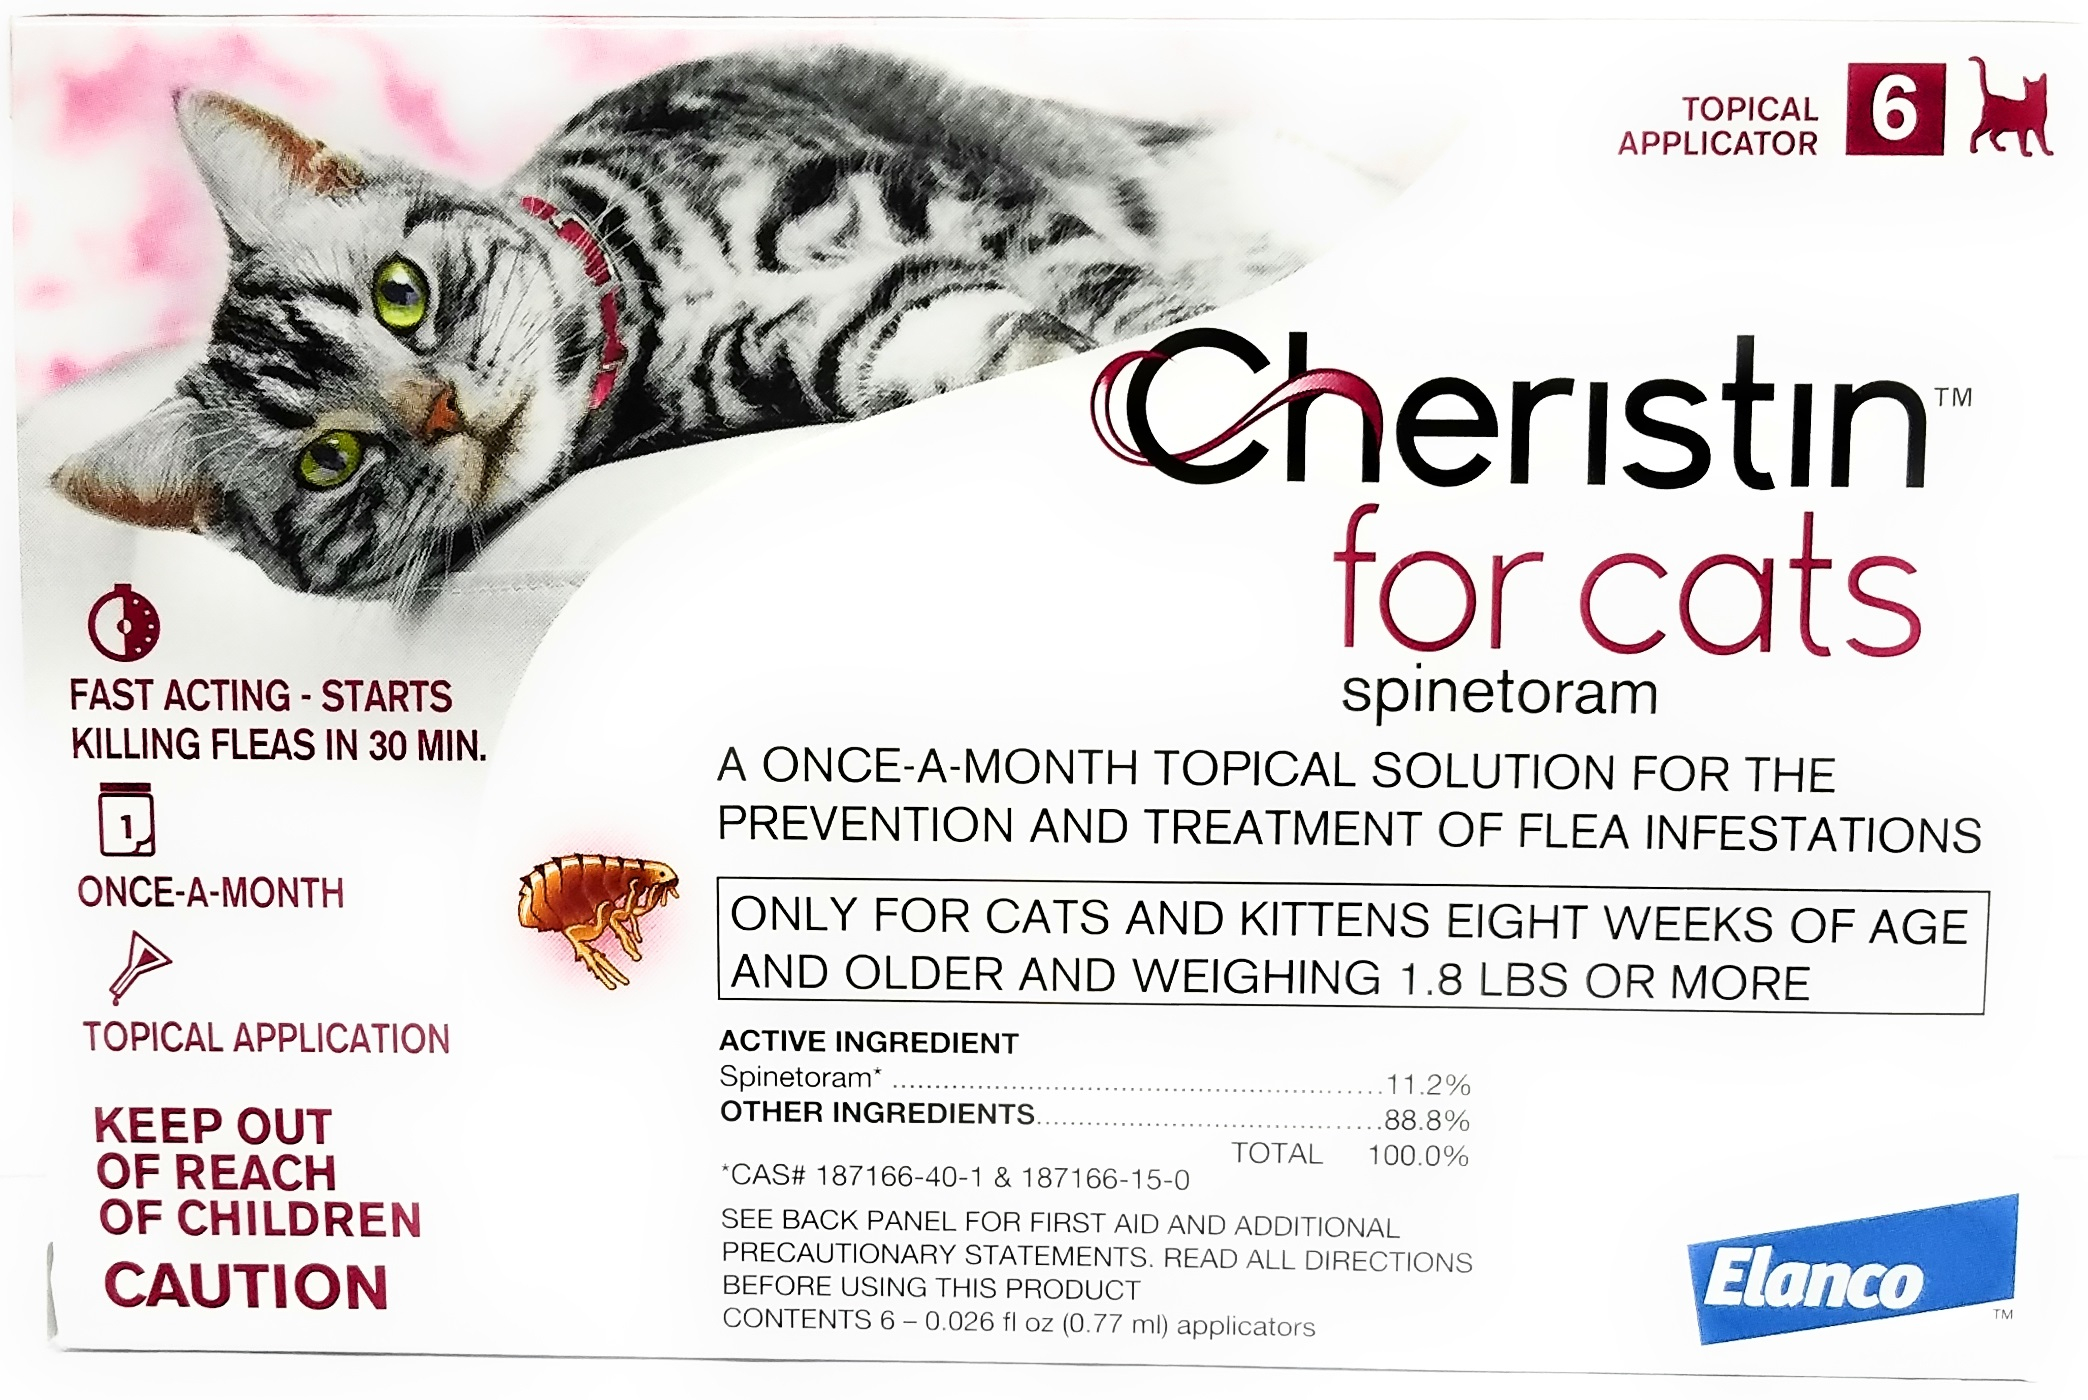 Vet Approved Rx Cheristin Topical Flea Treatment for Cats Over 1.8 lbs